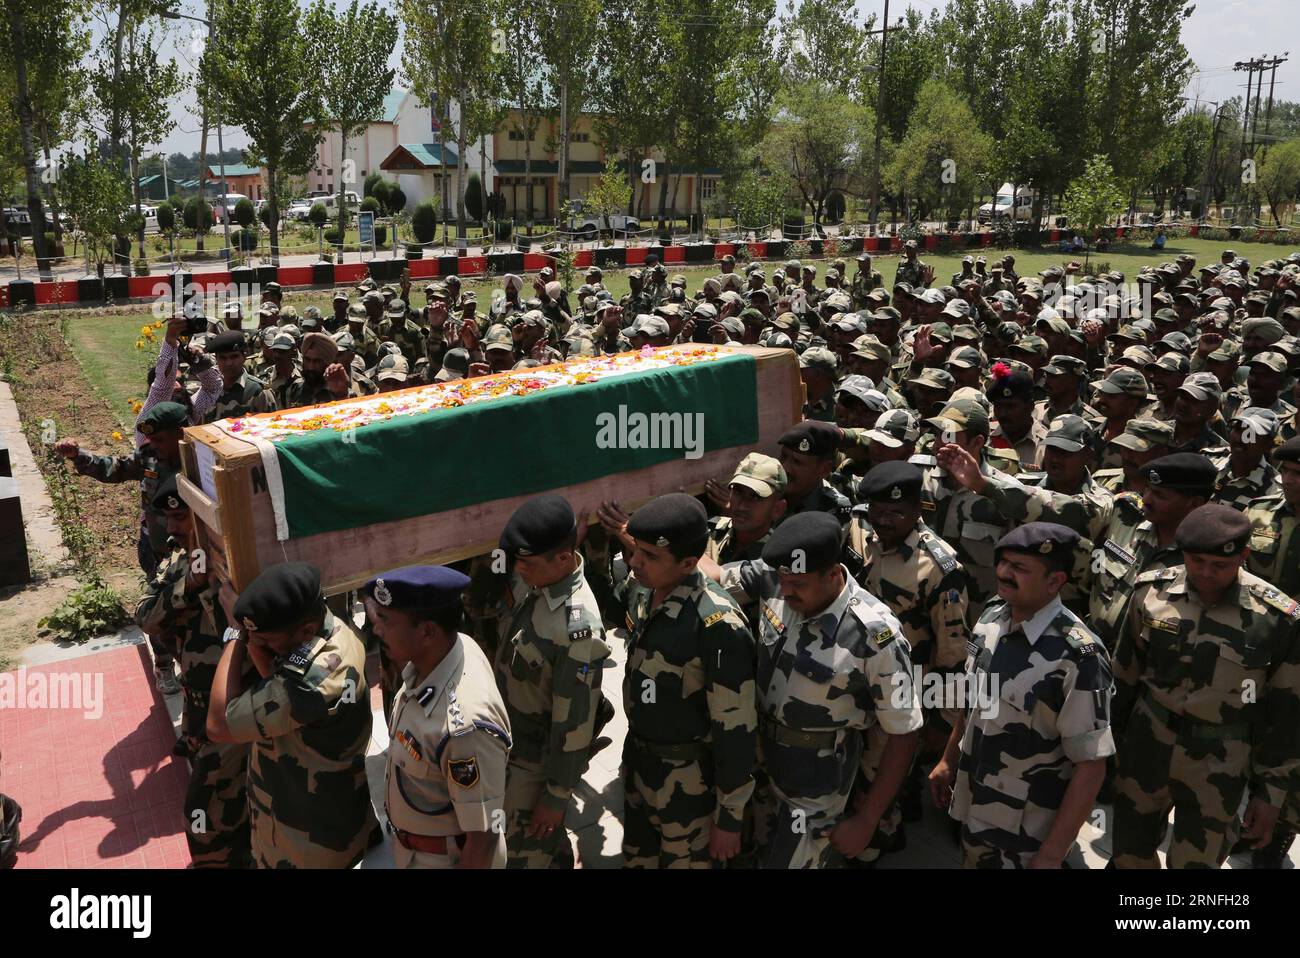 Indien - Beerdigung von Soldaten (160809) -- SRINAGAR, Aug. 9, 2016 -- India s Border Security Force personnel carry the coffin of a slain trooper during wreath laying ceremony in Srinagar, summer capital of Indian-controlled Kashmir, on Aug. 9, 2016. Three Indian troops including a junior level officer and a militant were killed Monday in a fierce gunfight near the Line of Control (LoC), dividing Kashmir. ) (cyc) INDIAN-CONTROLLED KASHMIR-SRINAGAR-THREE BORDER GUARDS KILLED JavedxDar PUBLICATIONxNOTxINxCHN   India Funeral from Soldiers 160809 Srinagar Aug 9 2016 India S Border Security Force Stock Photo